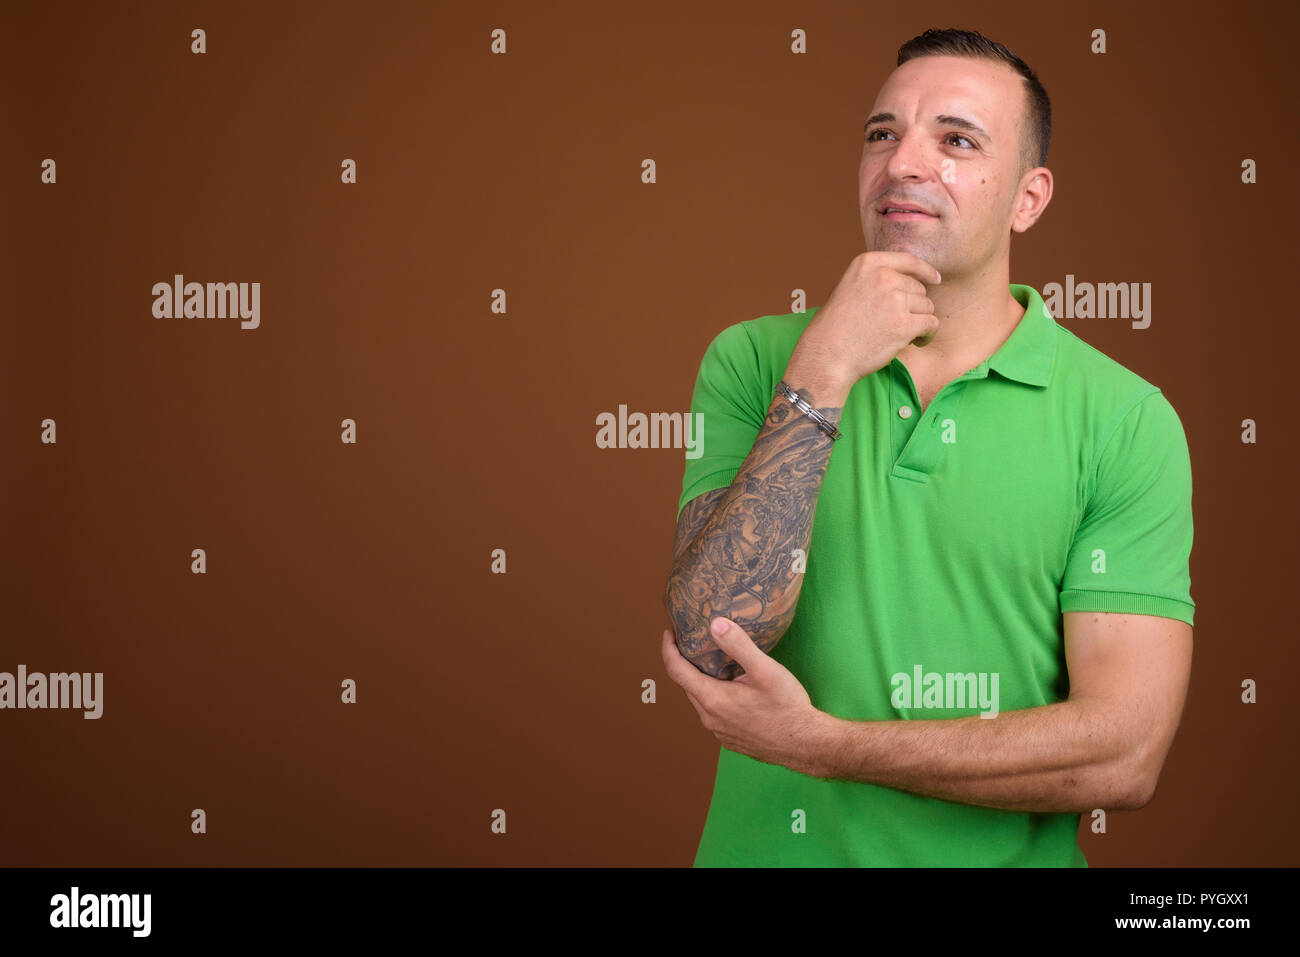 Man wearing green shirt against brown background Stock Photo